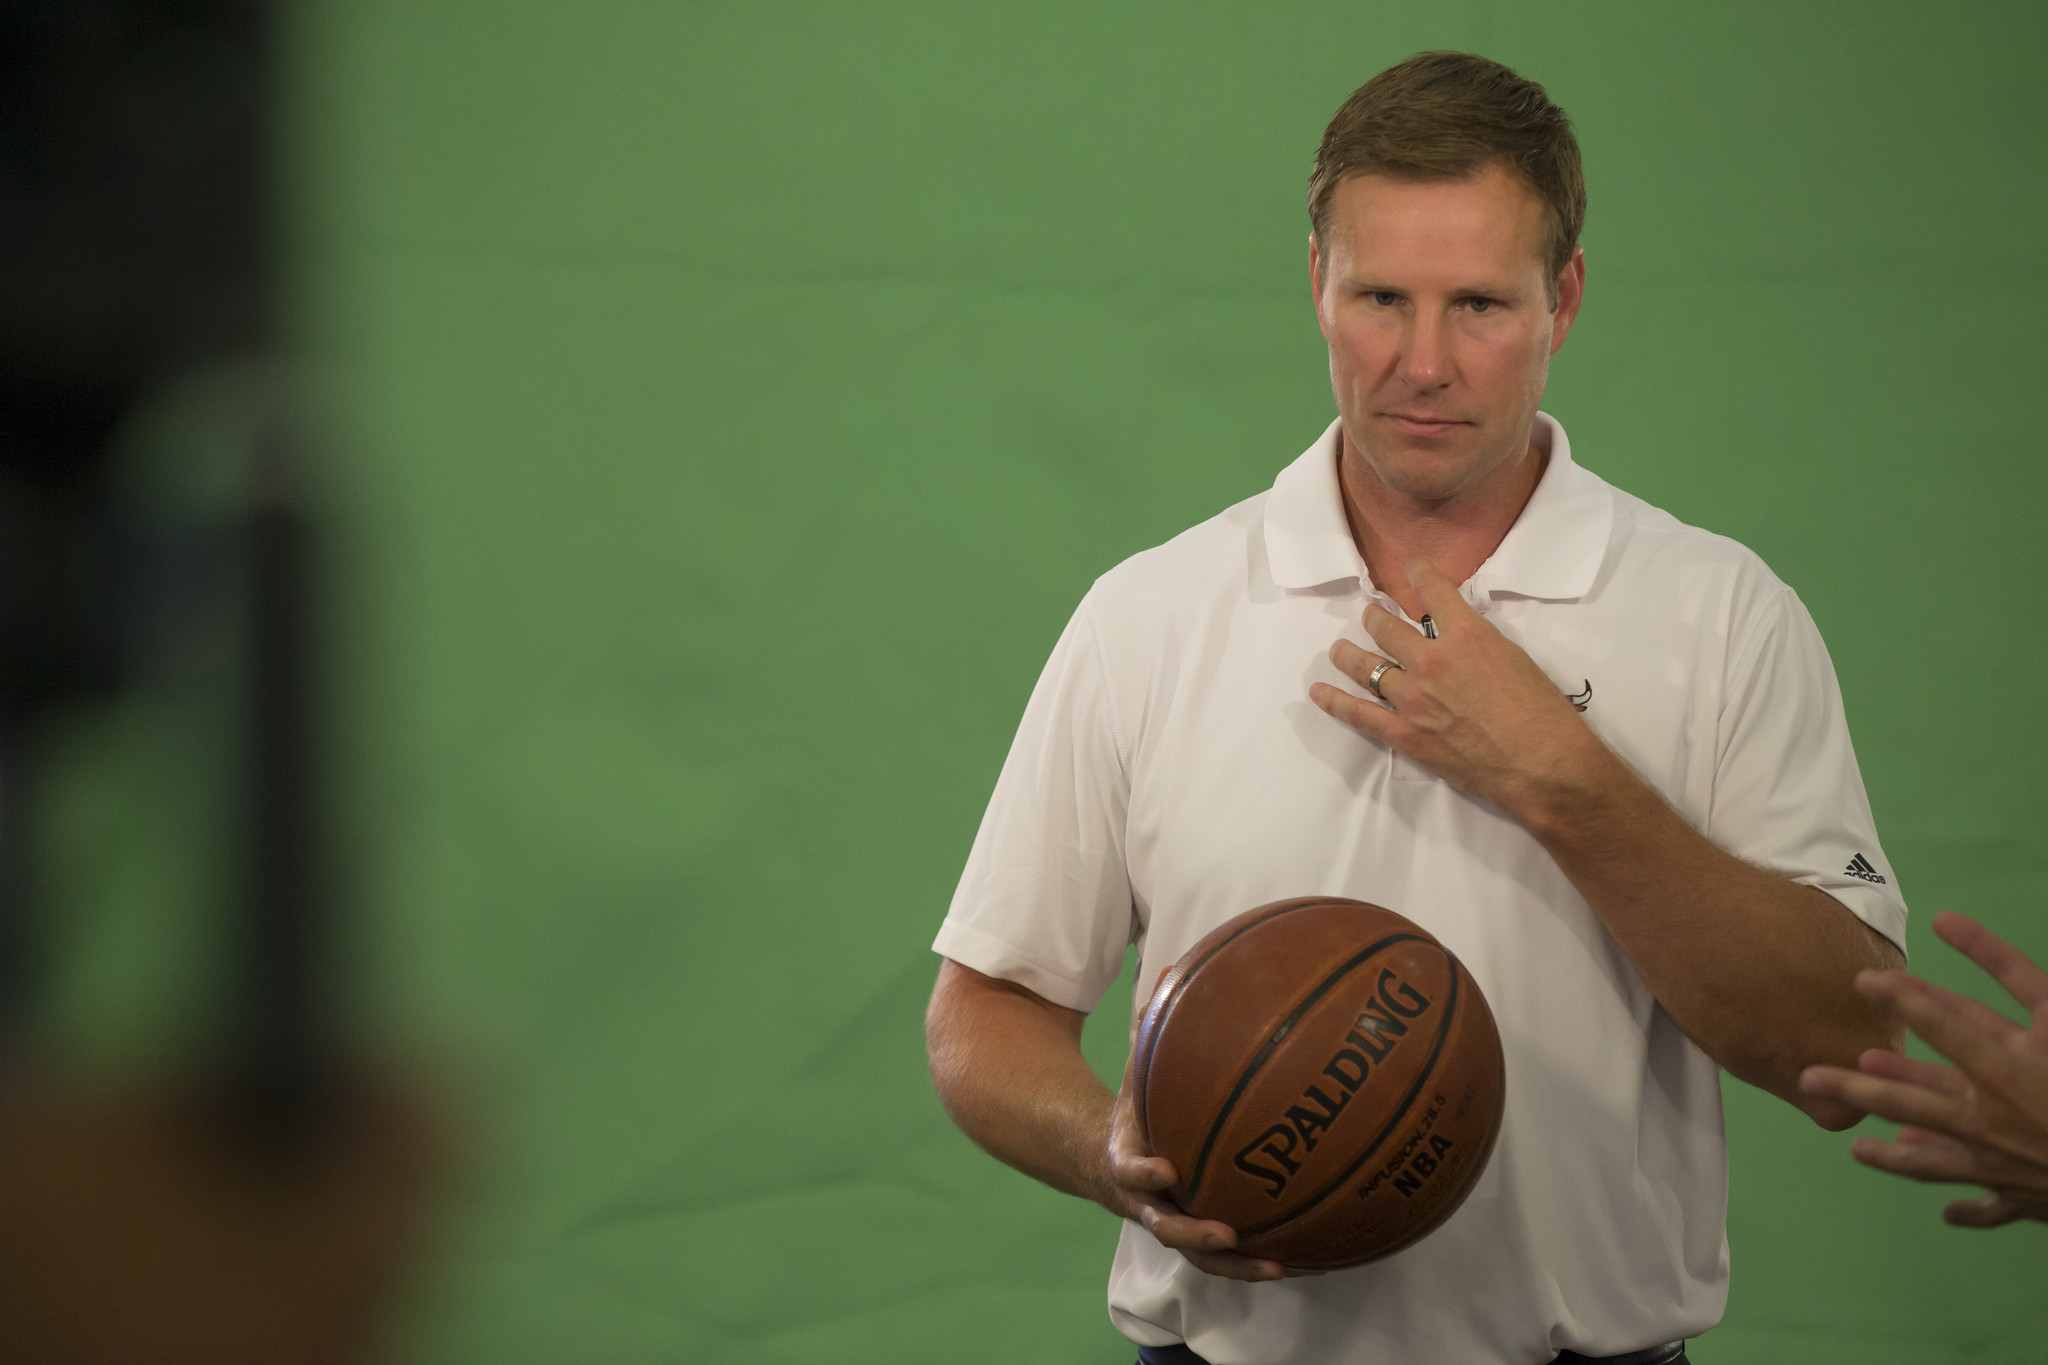 Bulls expect growth from coach Fred Hoiberg - and so does Hoiberg